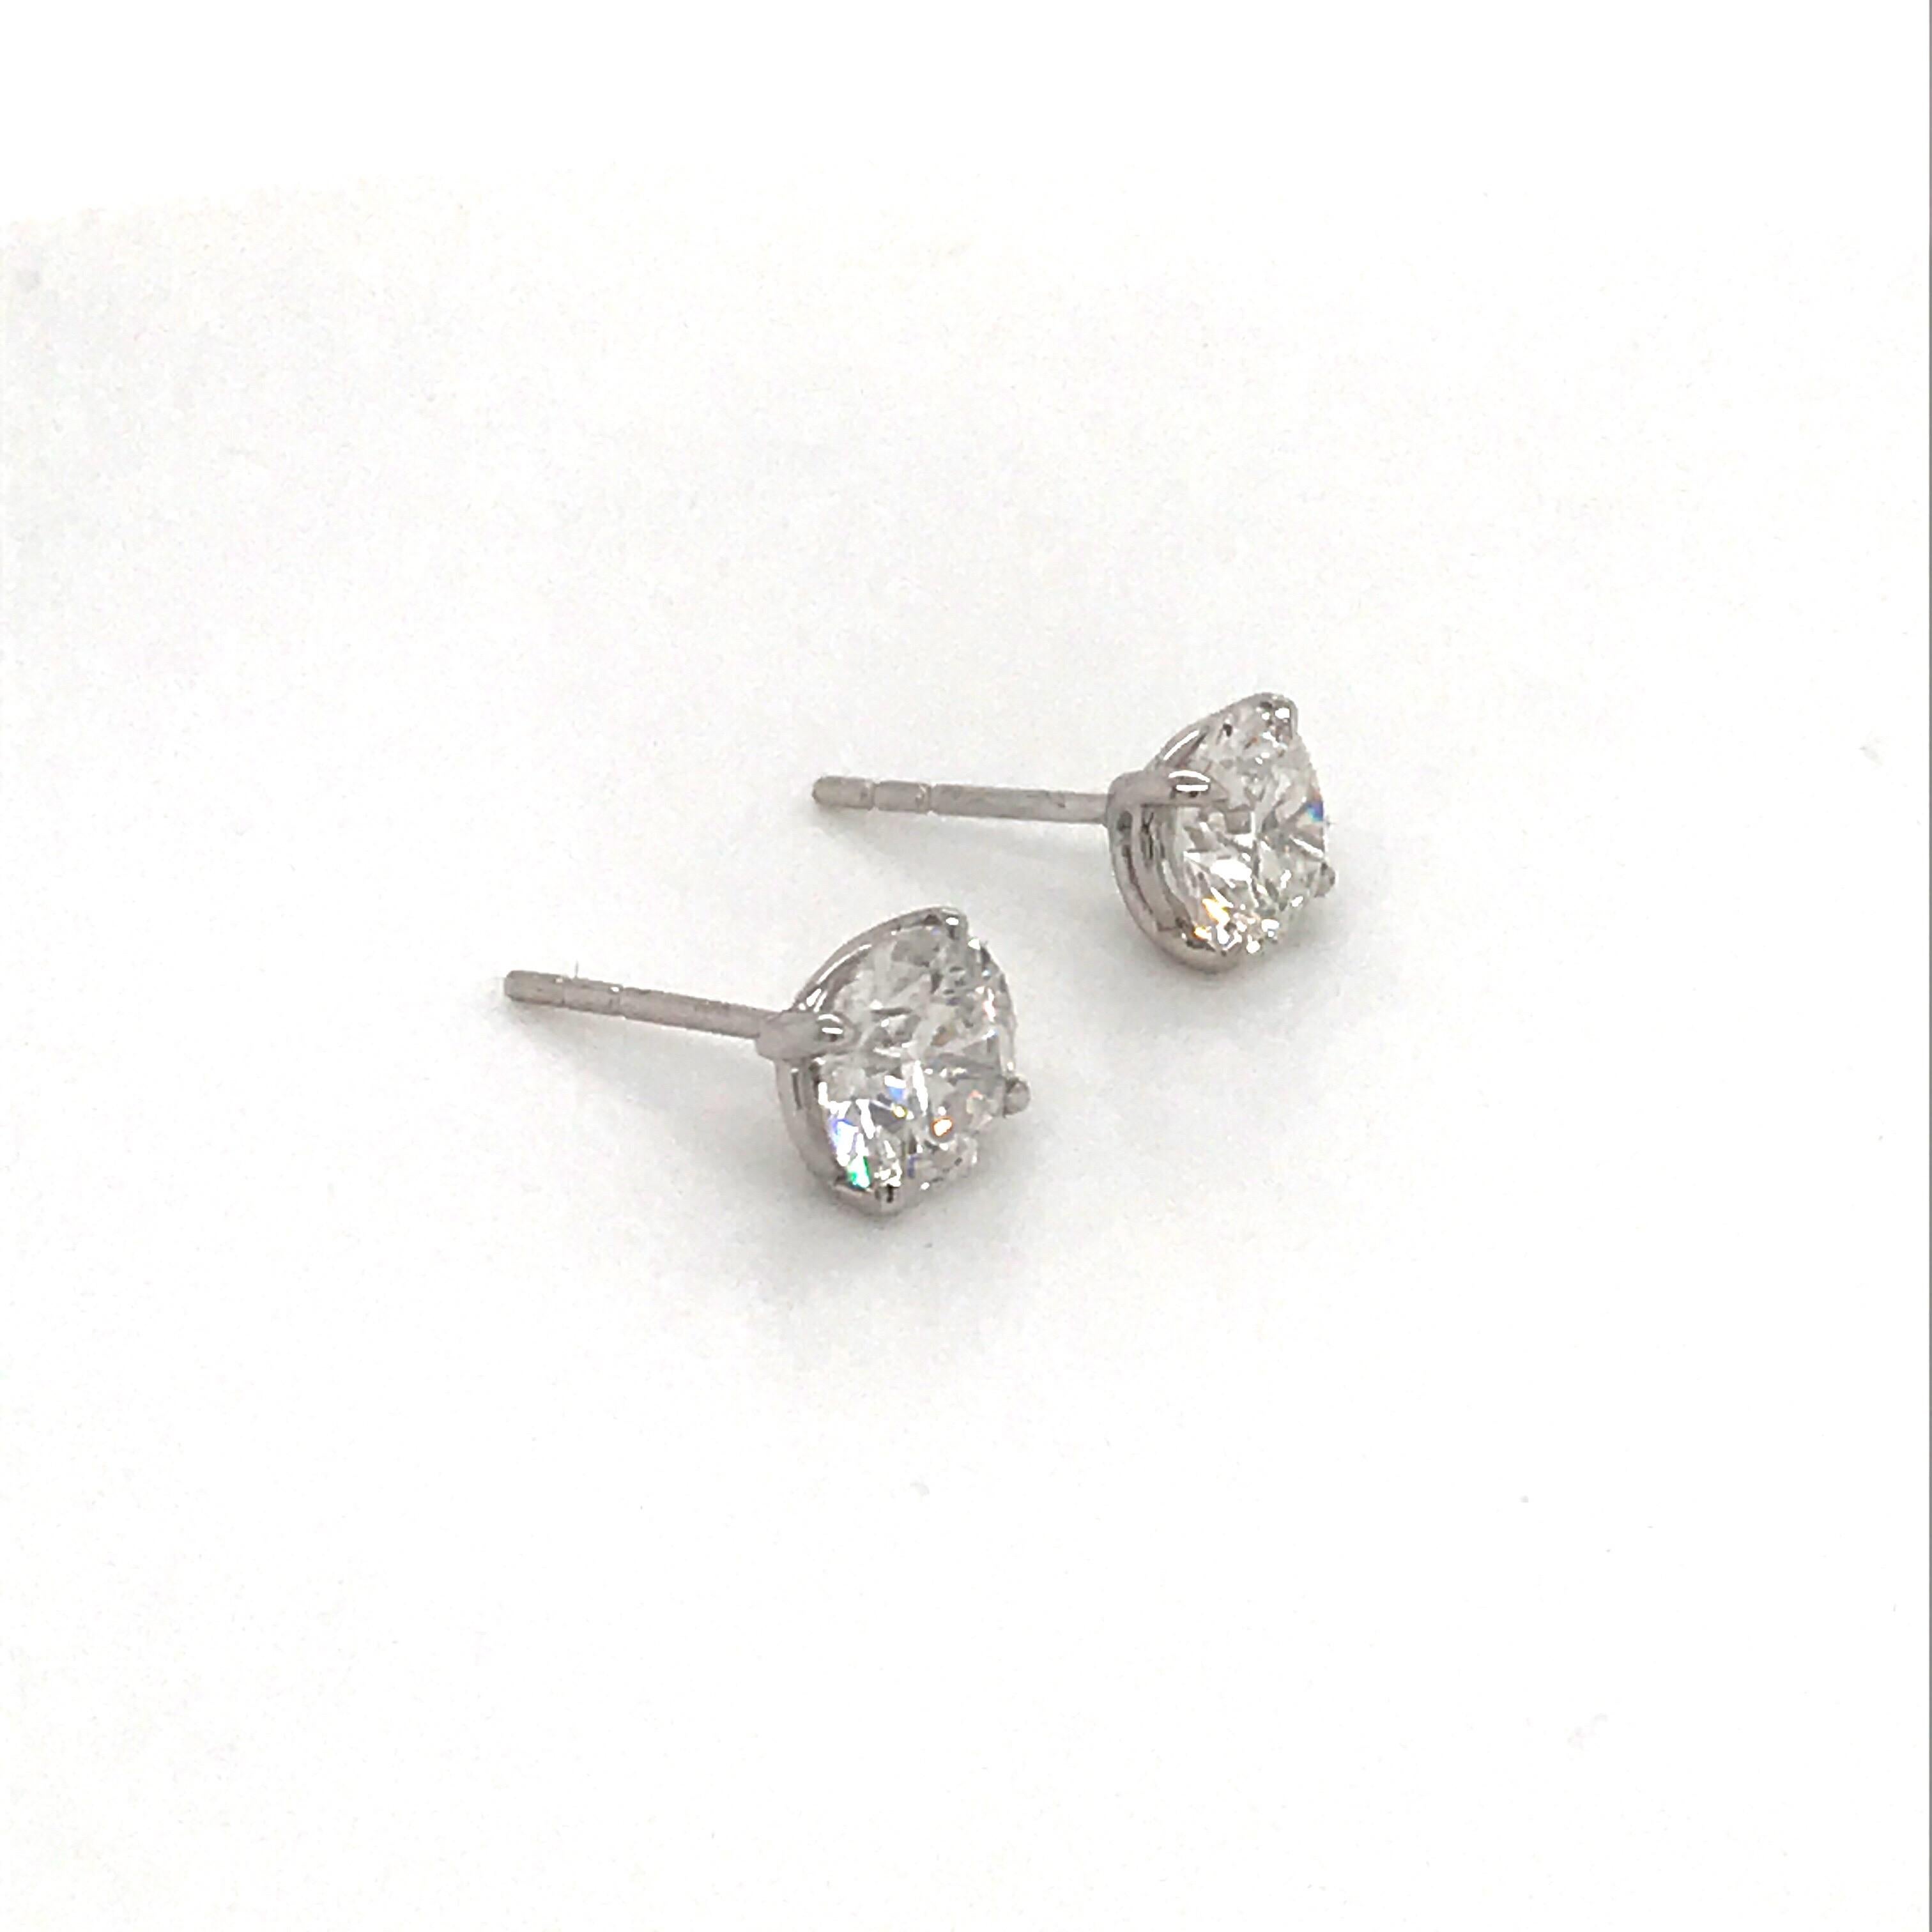 Diamond stud earrings weighing 1.42 carats in a 4 prong martini setting, 14k white gold. 
Color F-G
Clarity I1

Beautiful brilliance. 